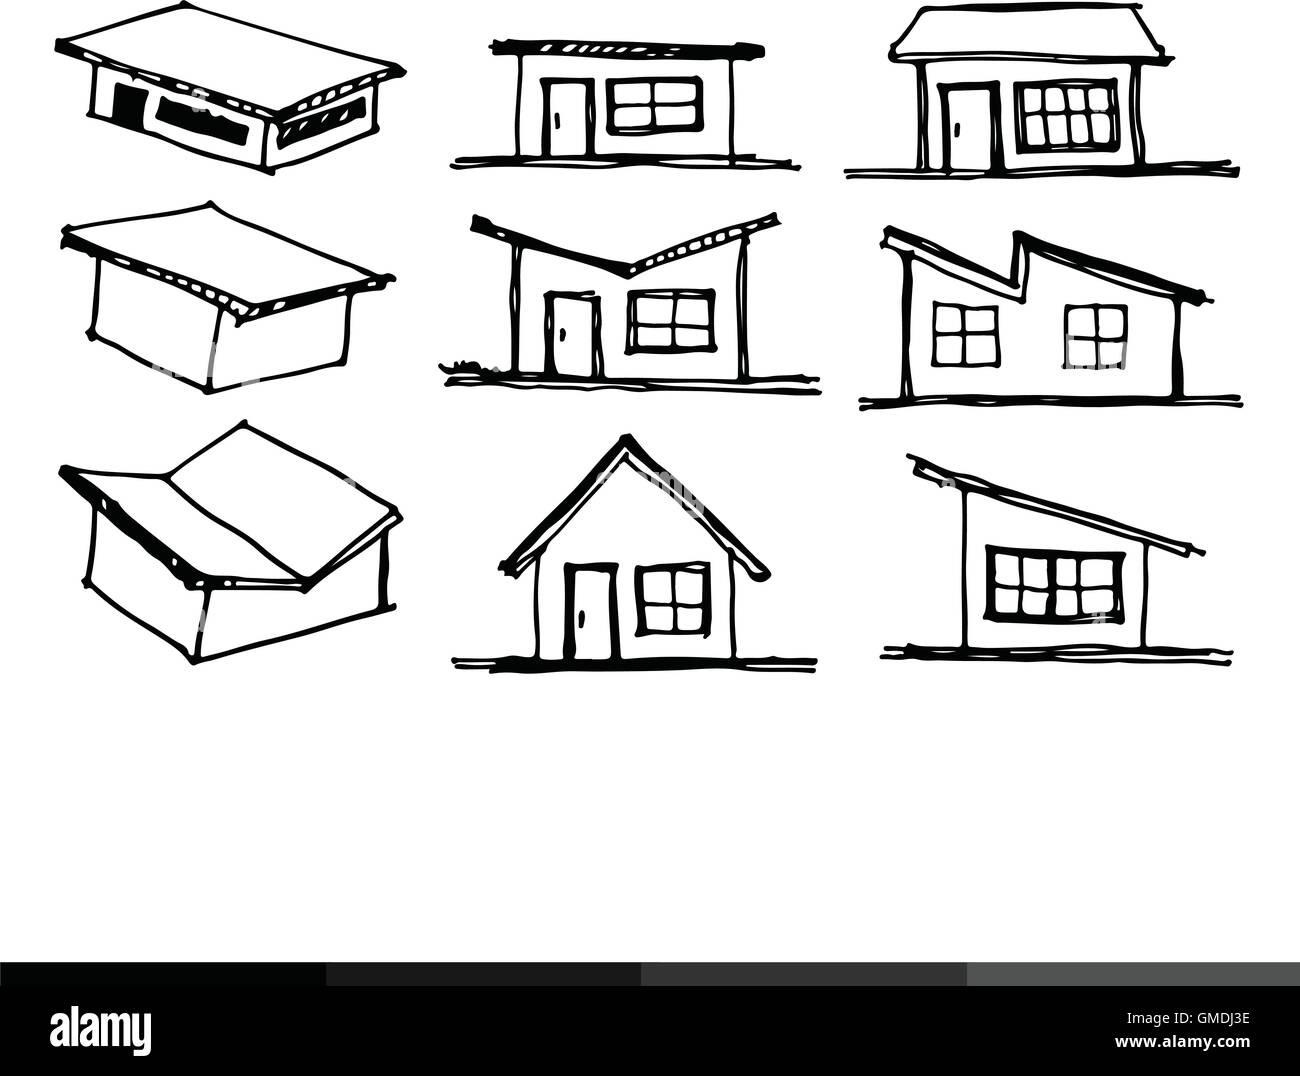 Wood Types Wood Freehand Drawing Graphics Stock Vector Royalty Free  229387081  Shutterstock